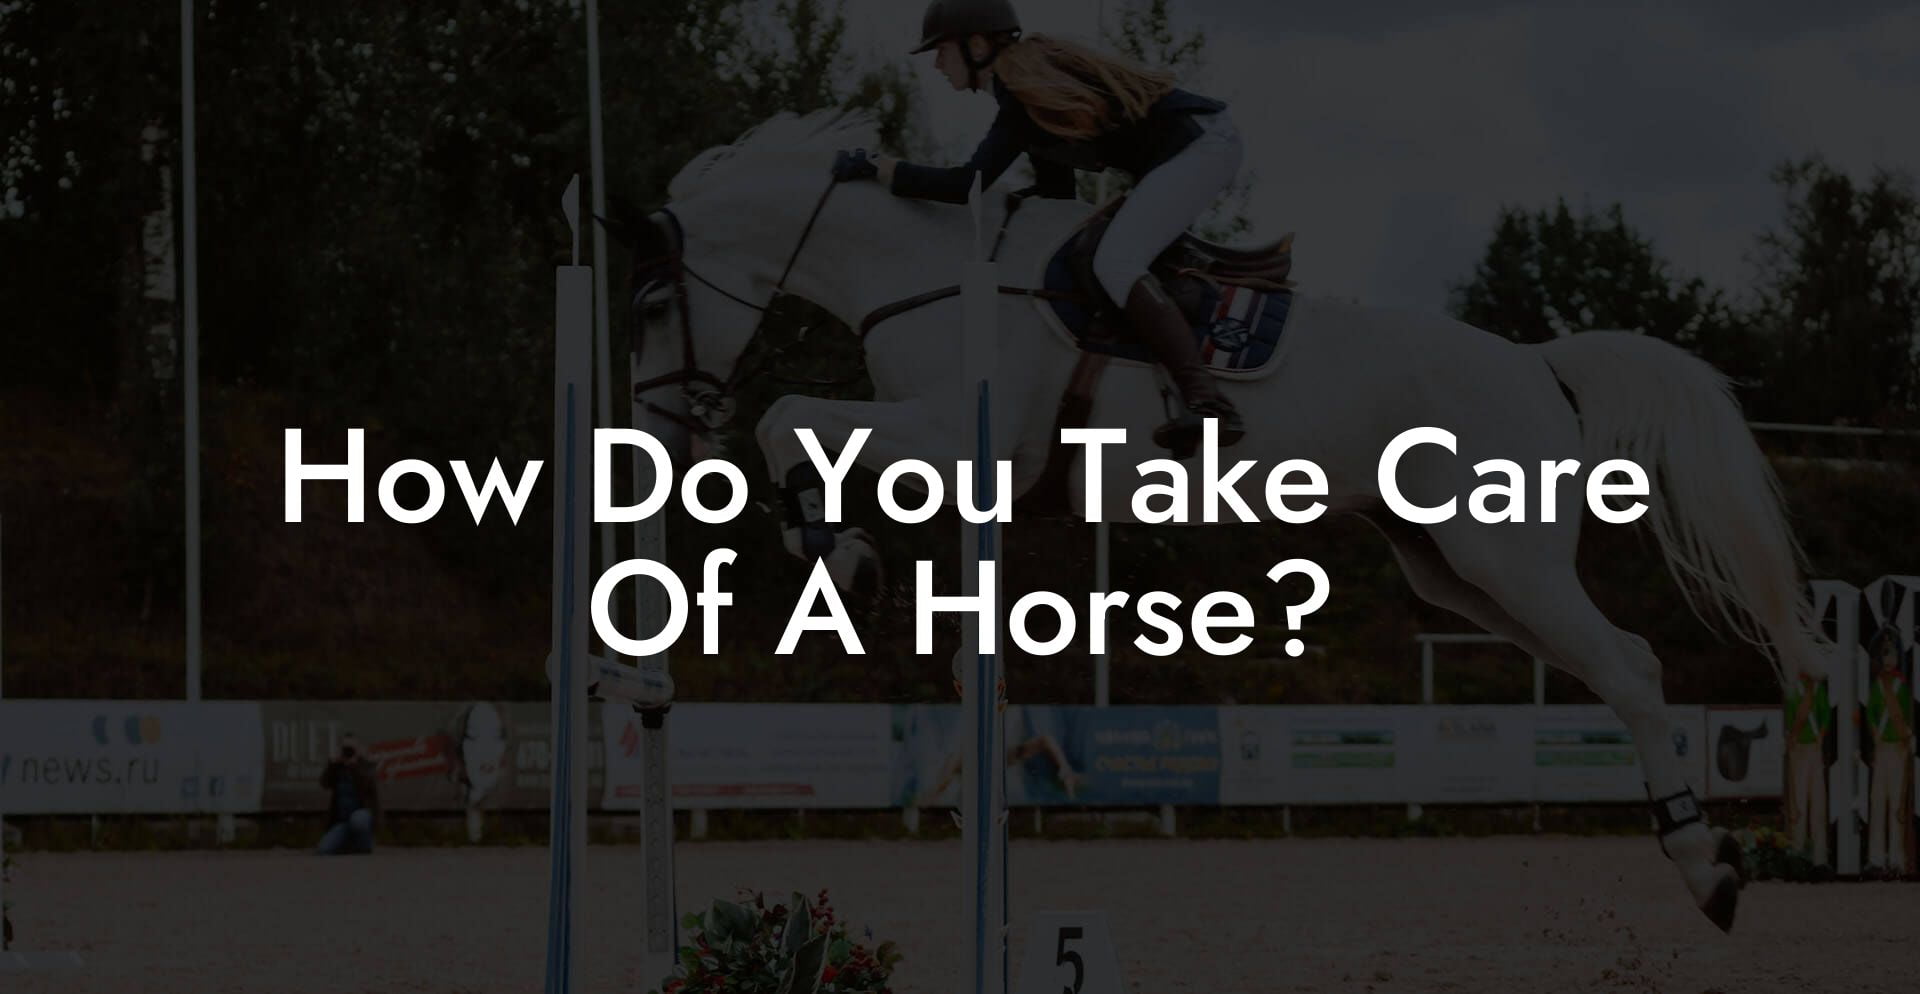 How Do You Take Care Of A Horse?